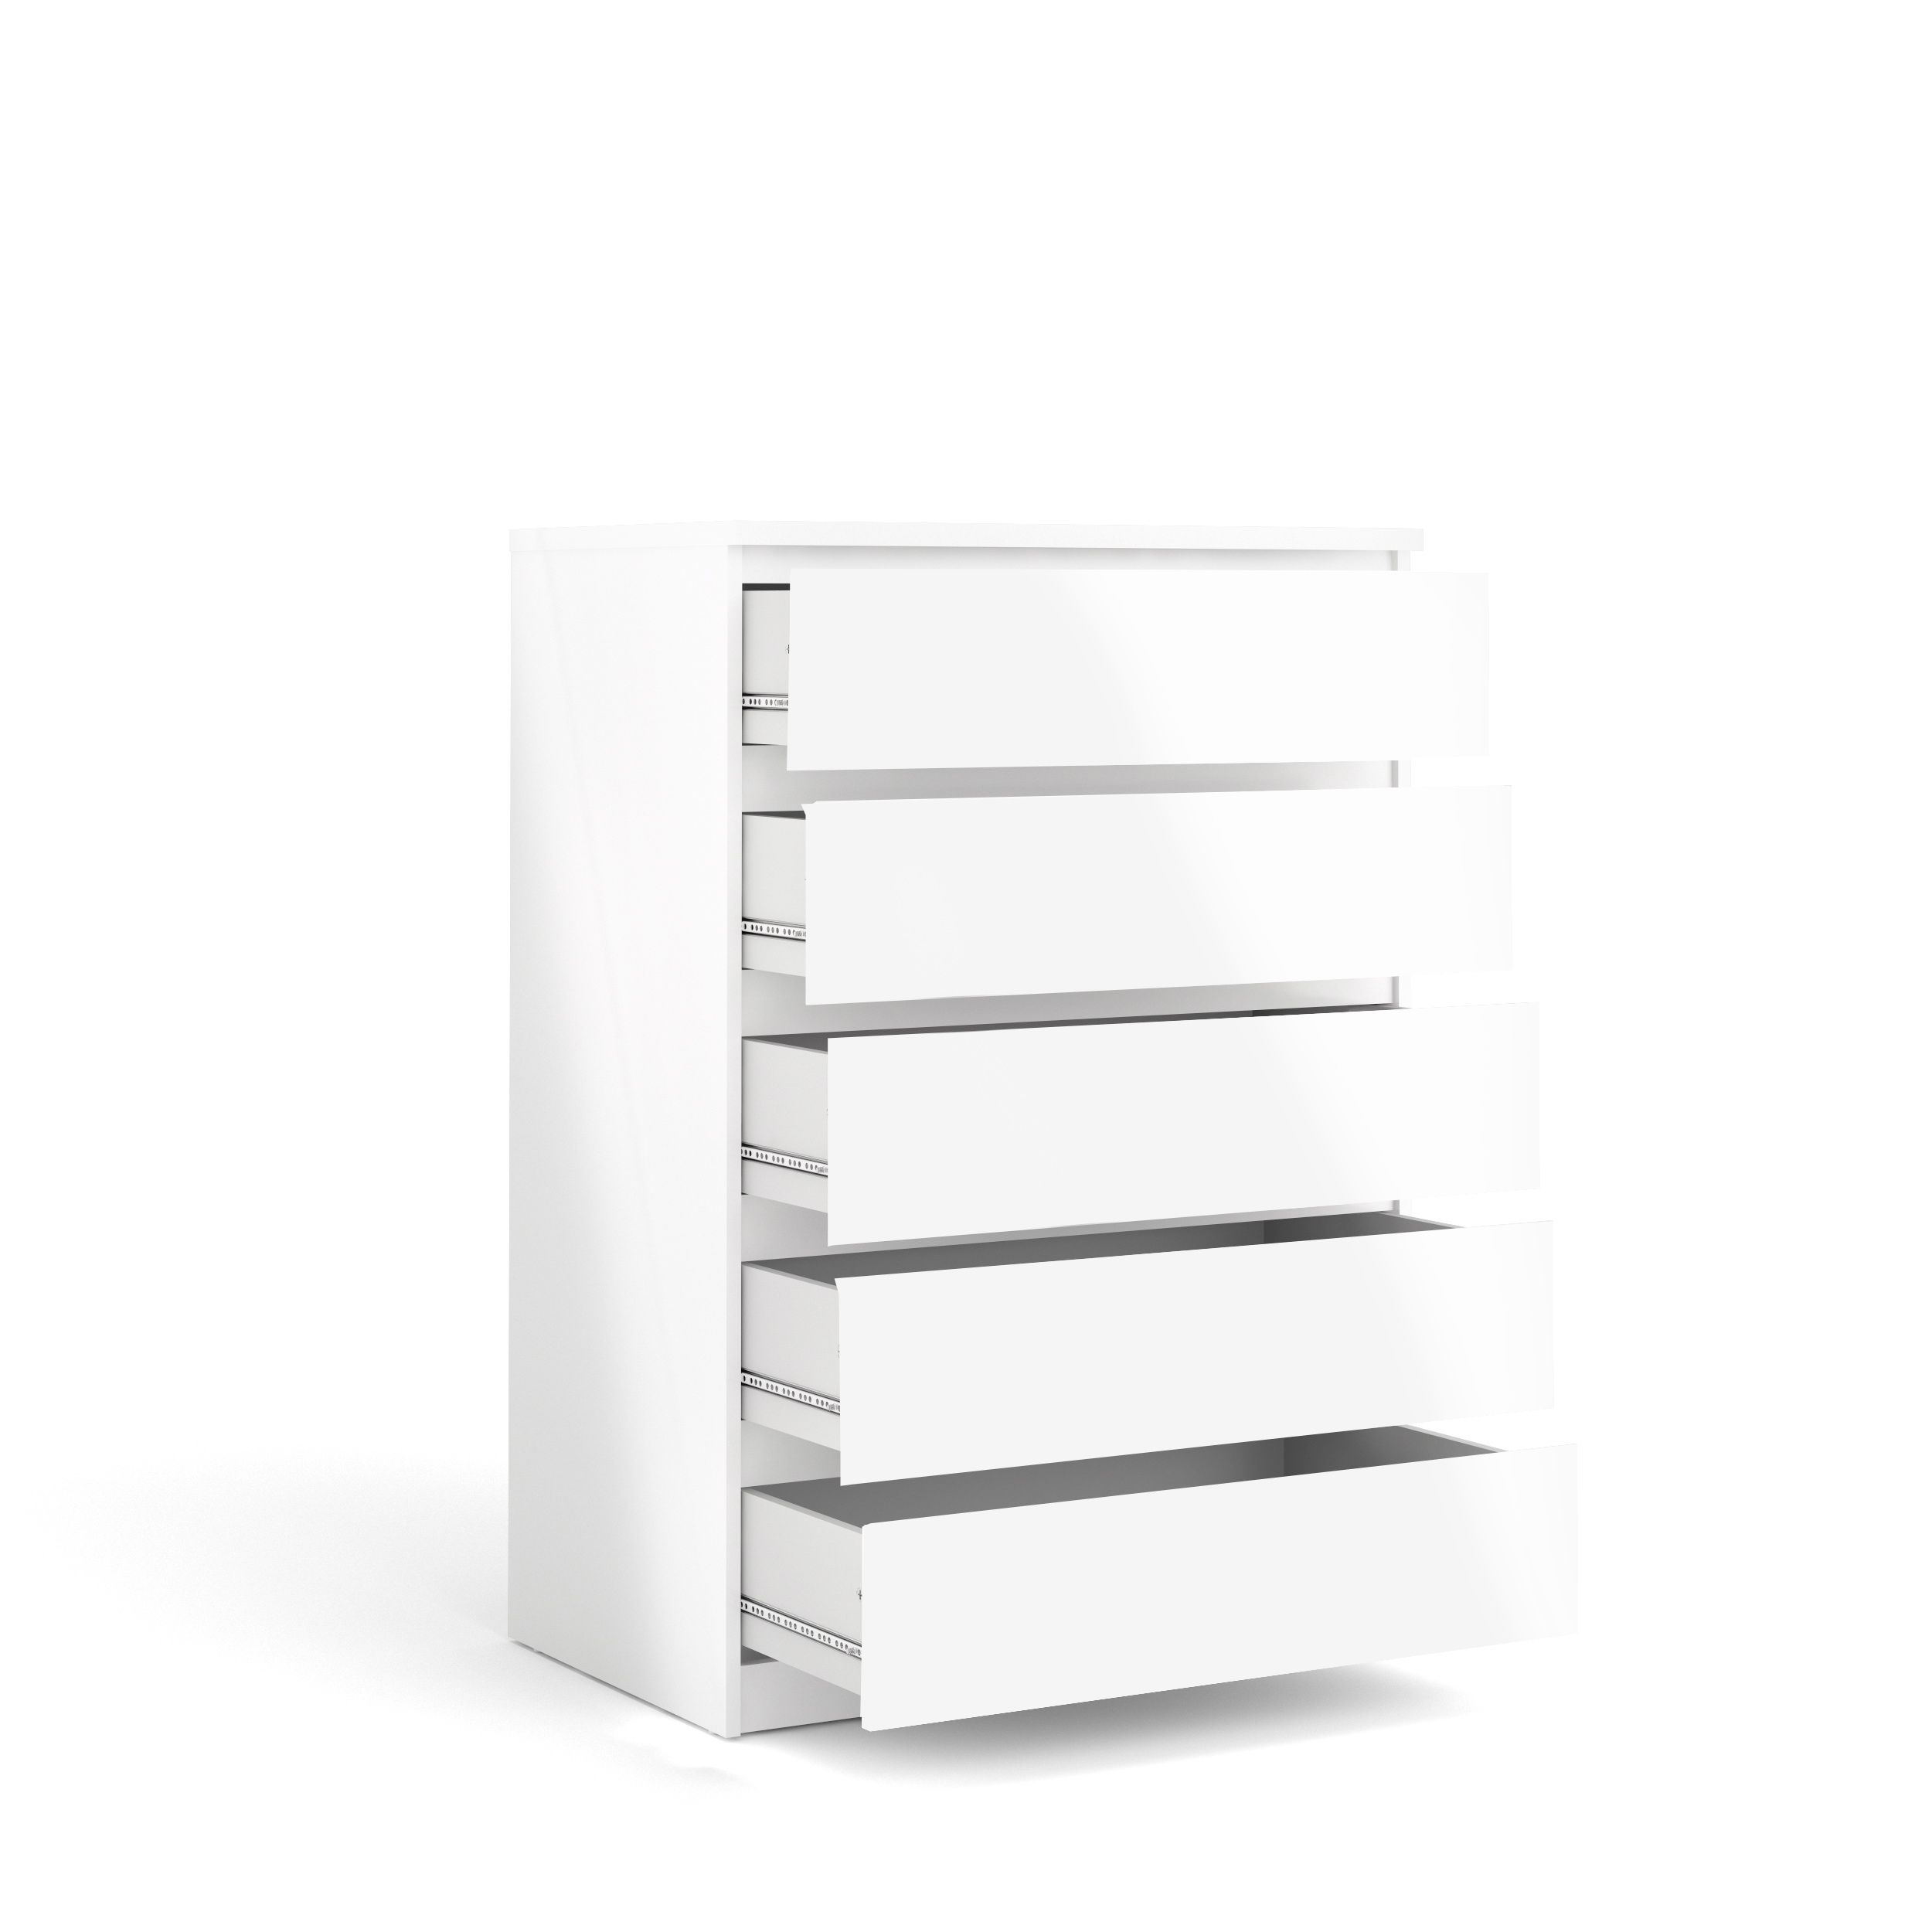 Esla High gloss white 5 Drawer Wide Chest of drawers (H)1110mm (W)770mm (D)500mm